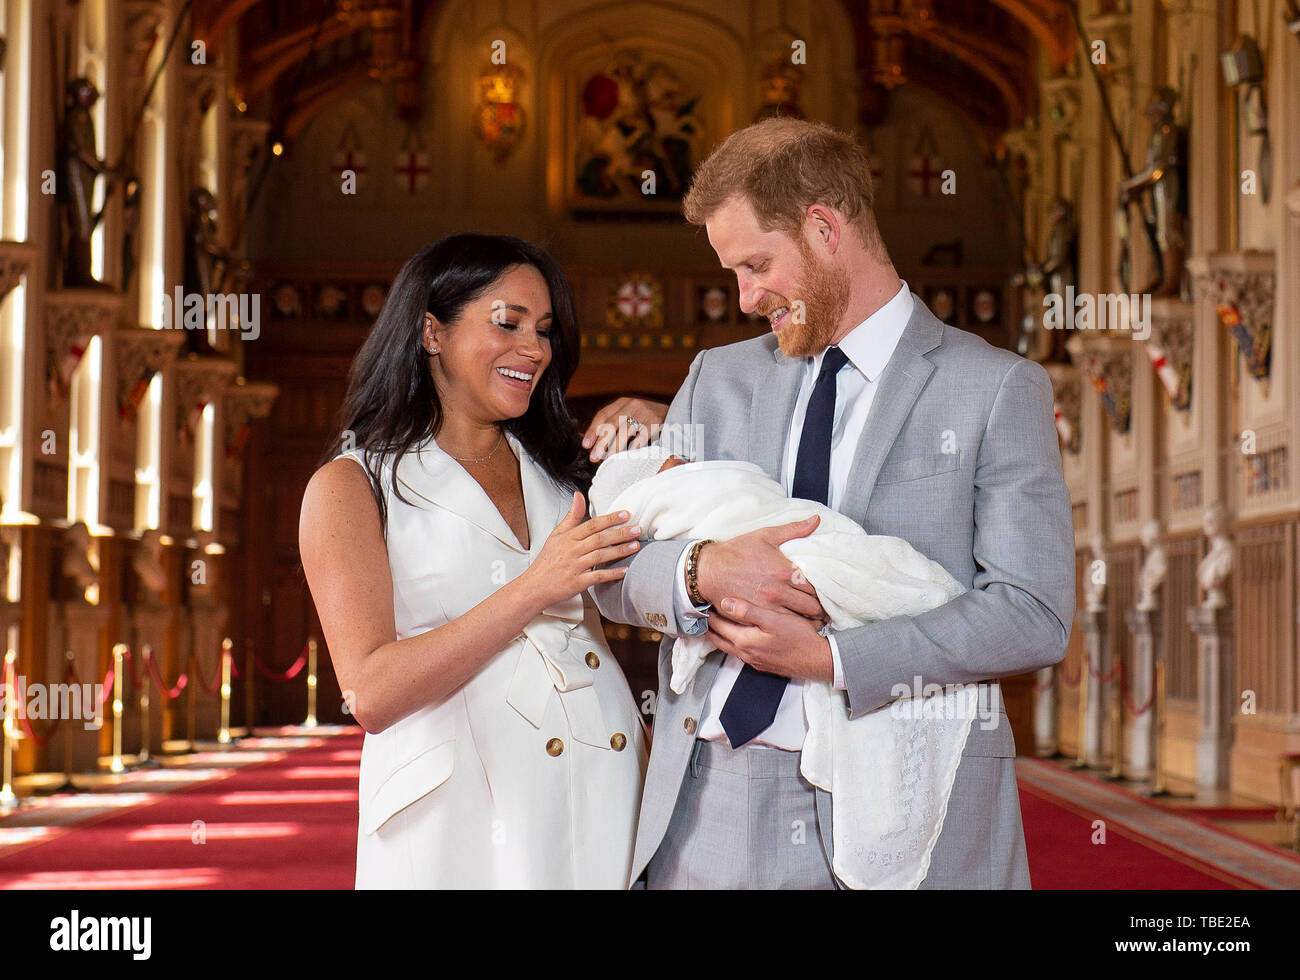 Beijing, Britain. 8th May, 2019. Britain's Prince Harry, Duke of Sussex (R), and his wife Meghan Markle, Duchess of Sussex, pose for a photo with their son in St George's Hall at Windsor Castle in Windsor, Britain, on May 8, 2019. Credit: Dominic Lipinski/PA Wire/Xinhua/Alamy Live News Stock Photo